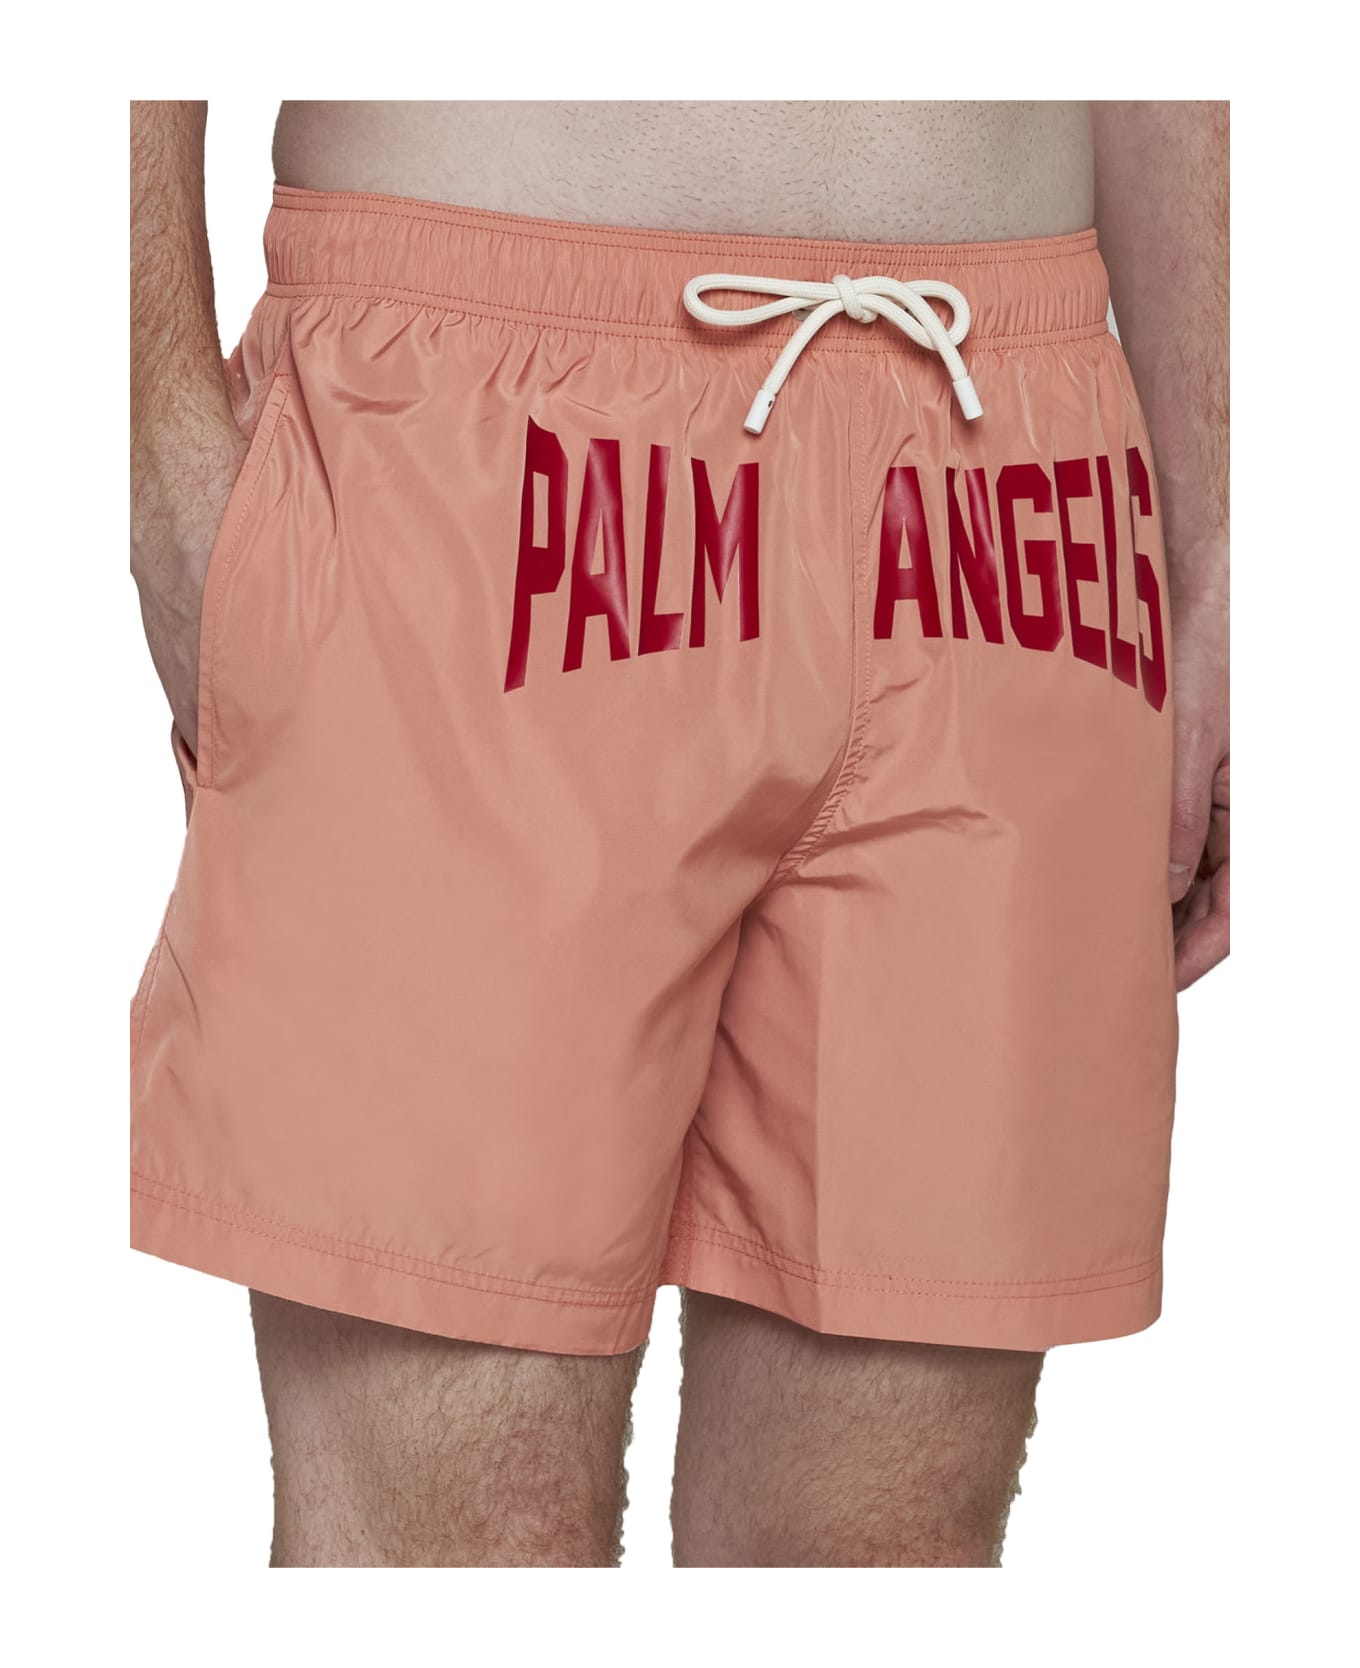 Palm Angels City Swimshort - Pink Red 水着